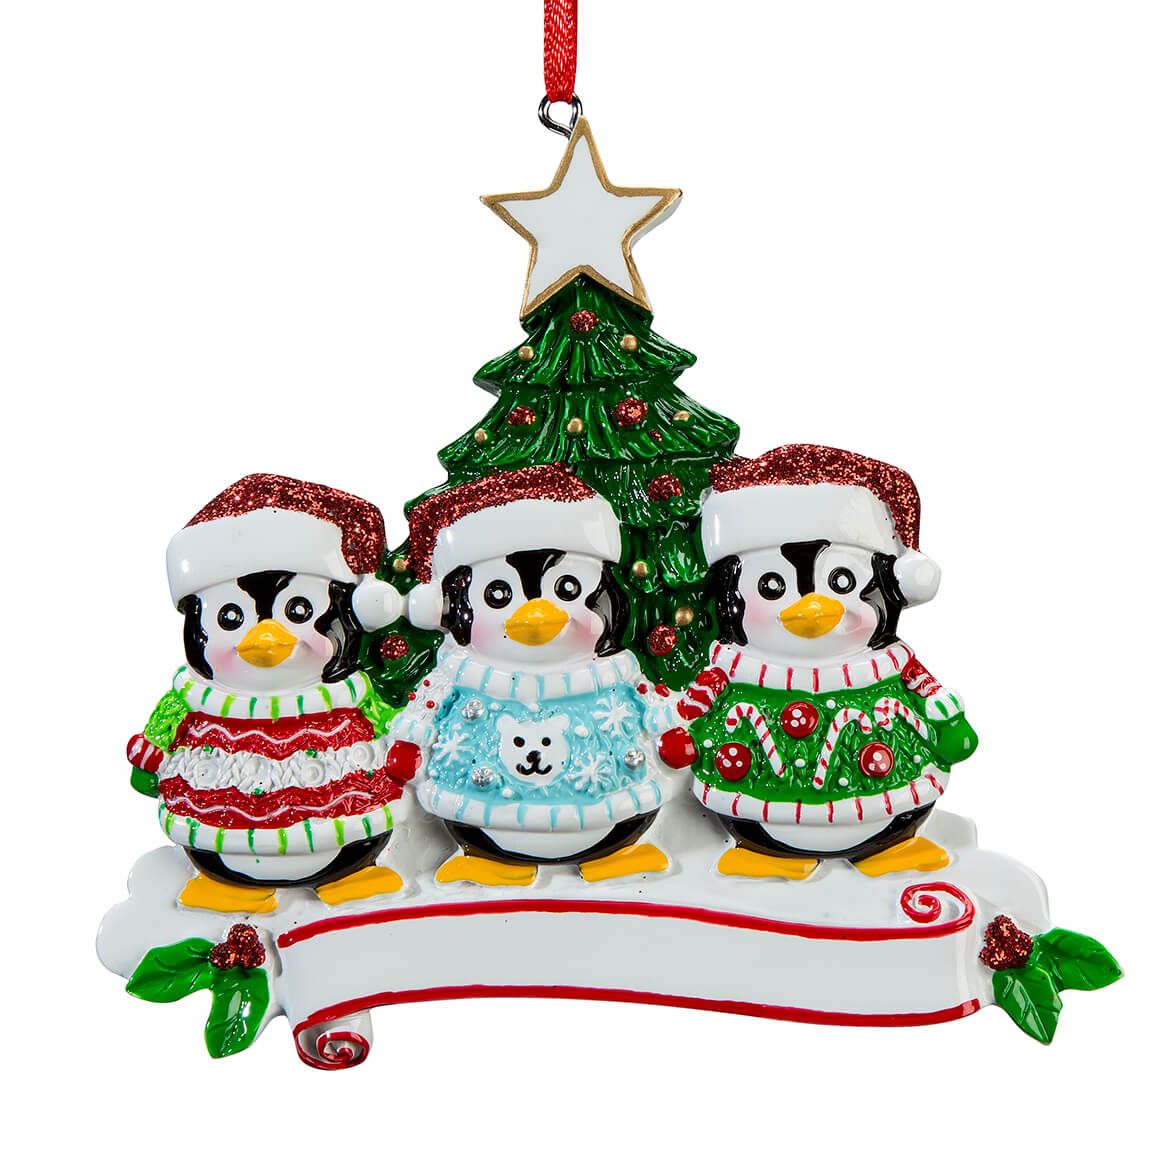 Penguins in Ugly Sweaters Ornament, Family of 3 + '-' + 364968